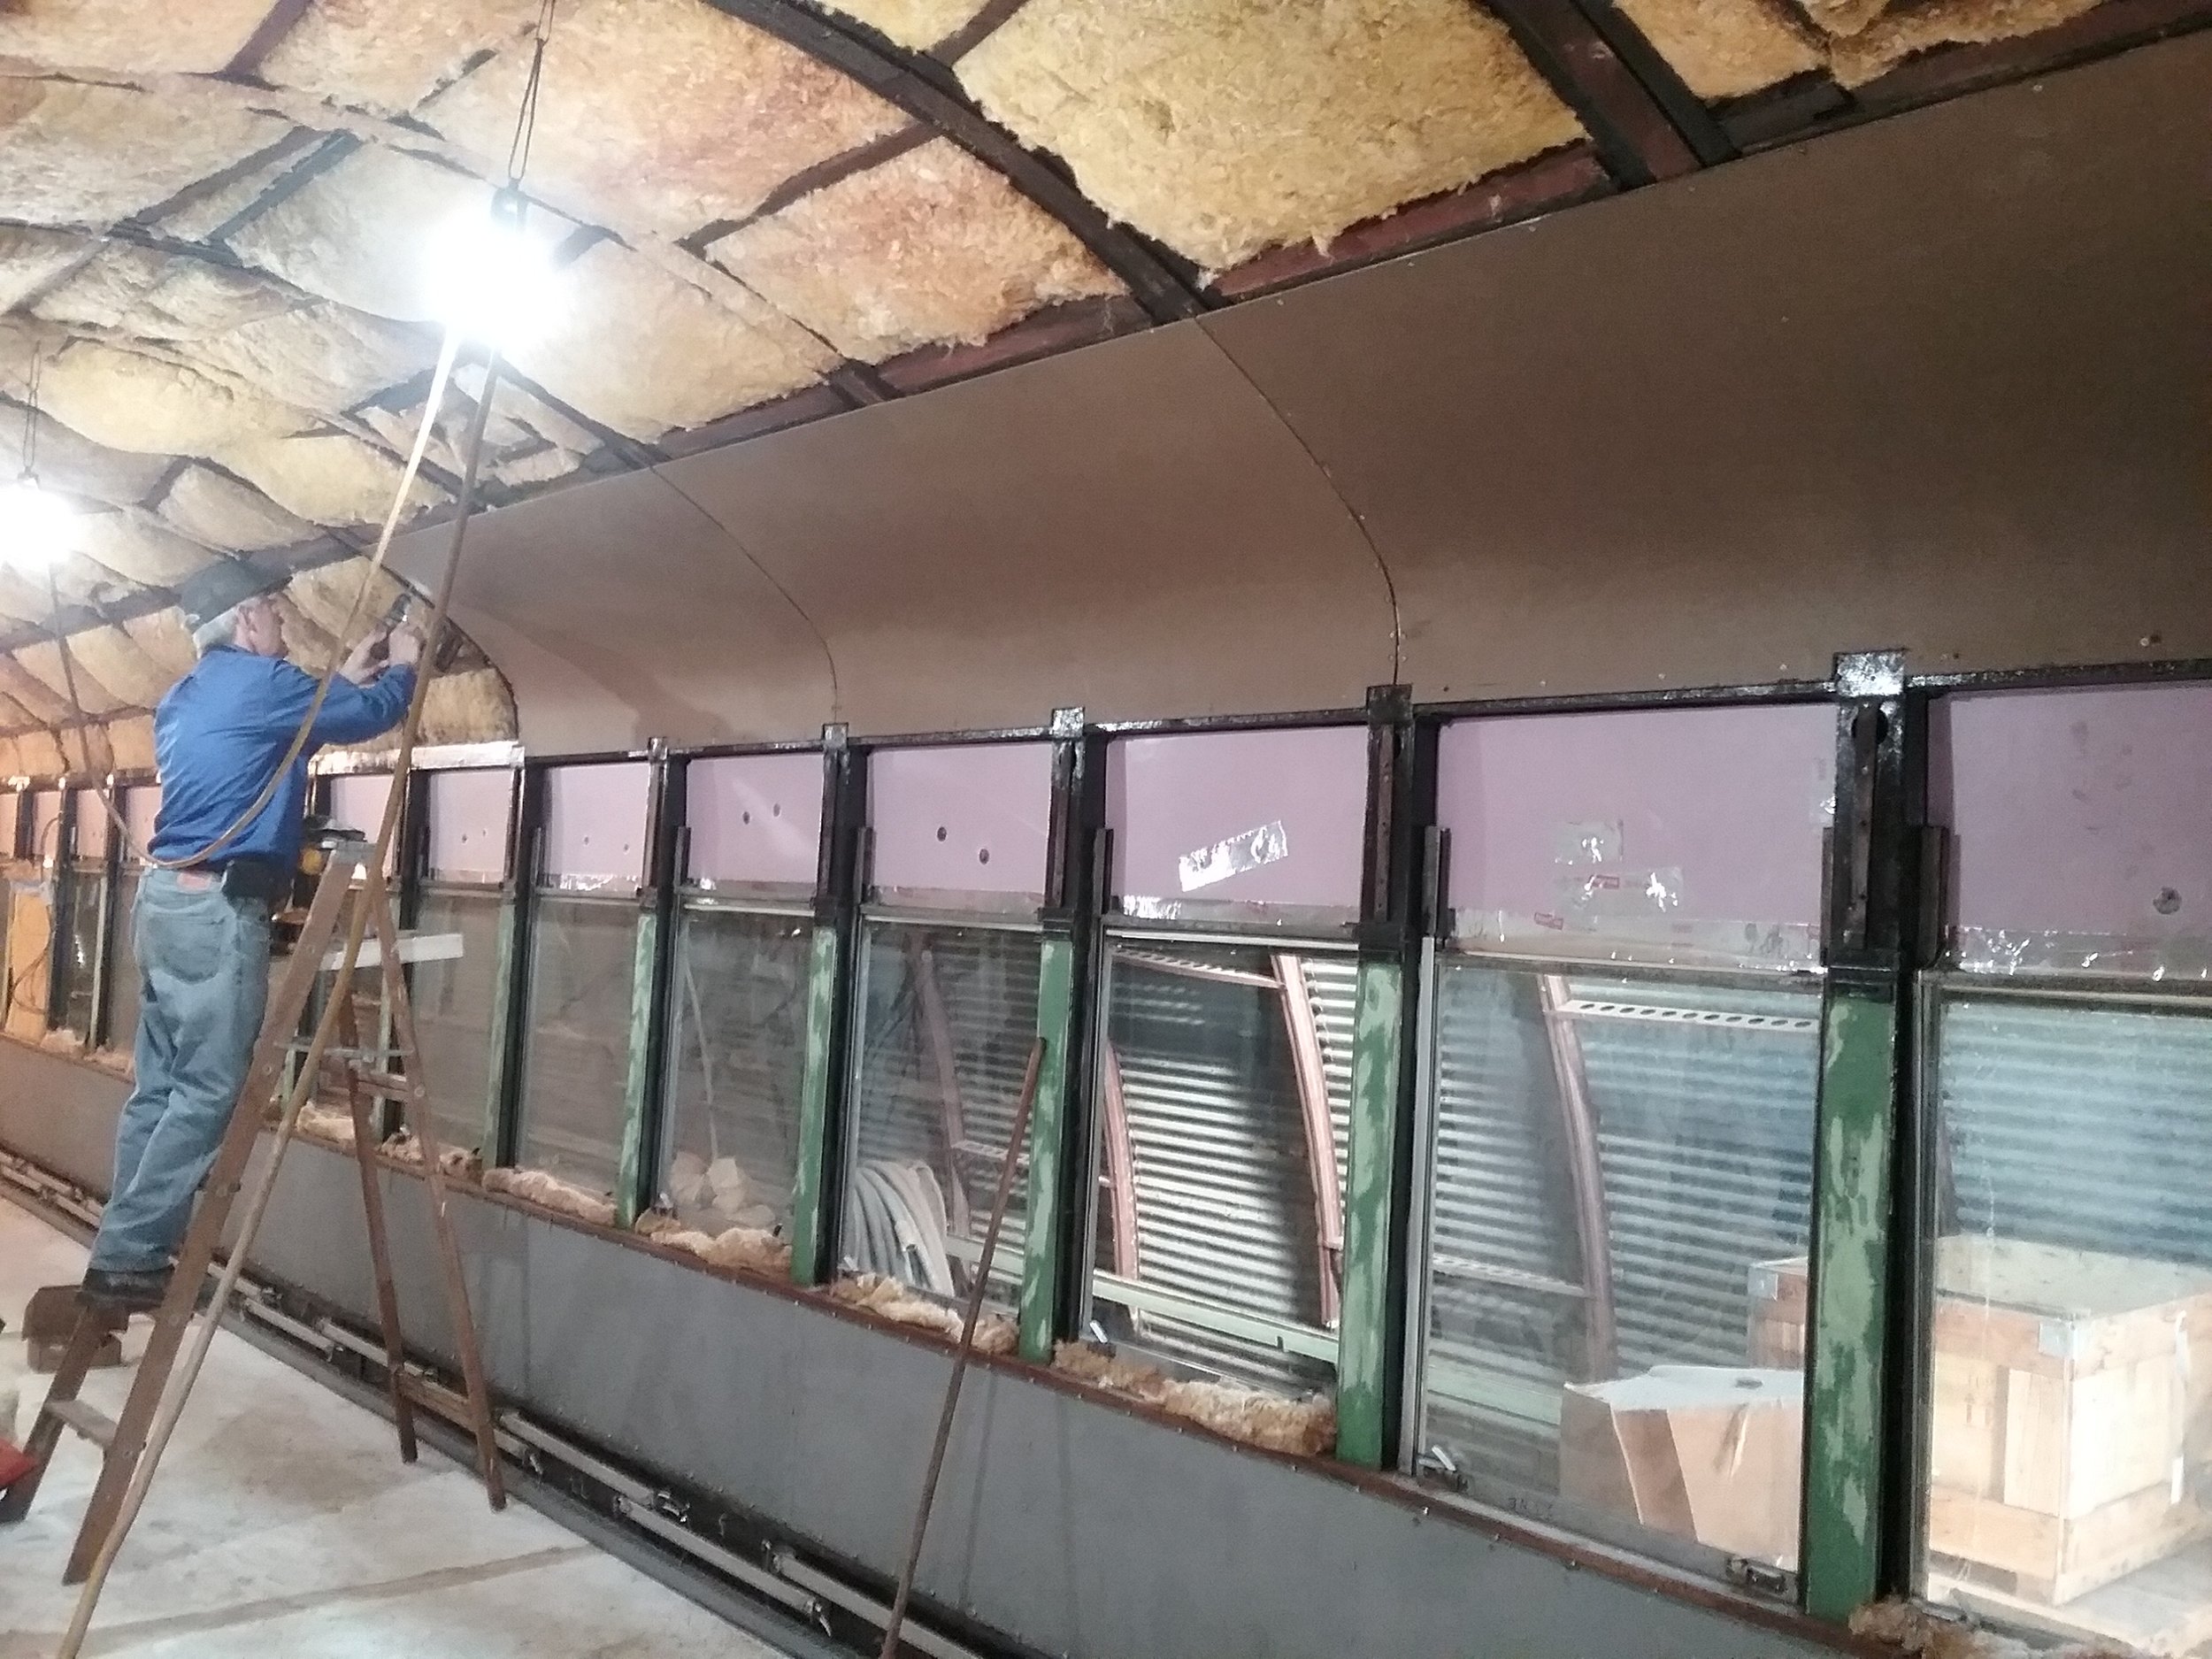  Ceiling panels continue above re-installed windows.  